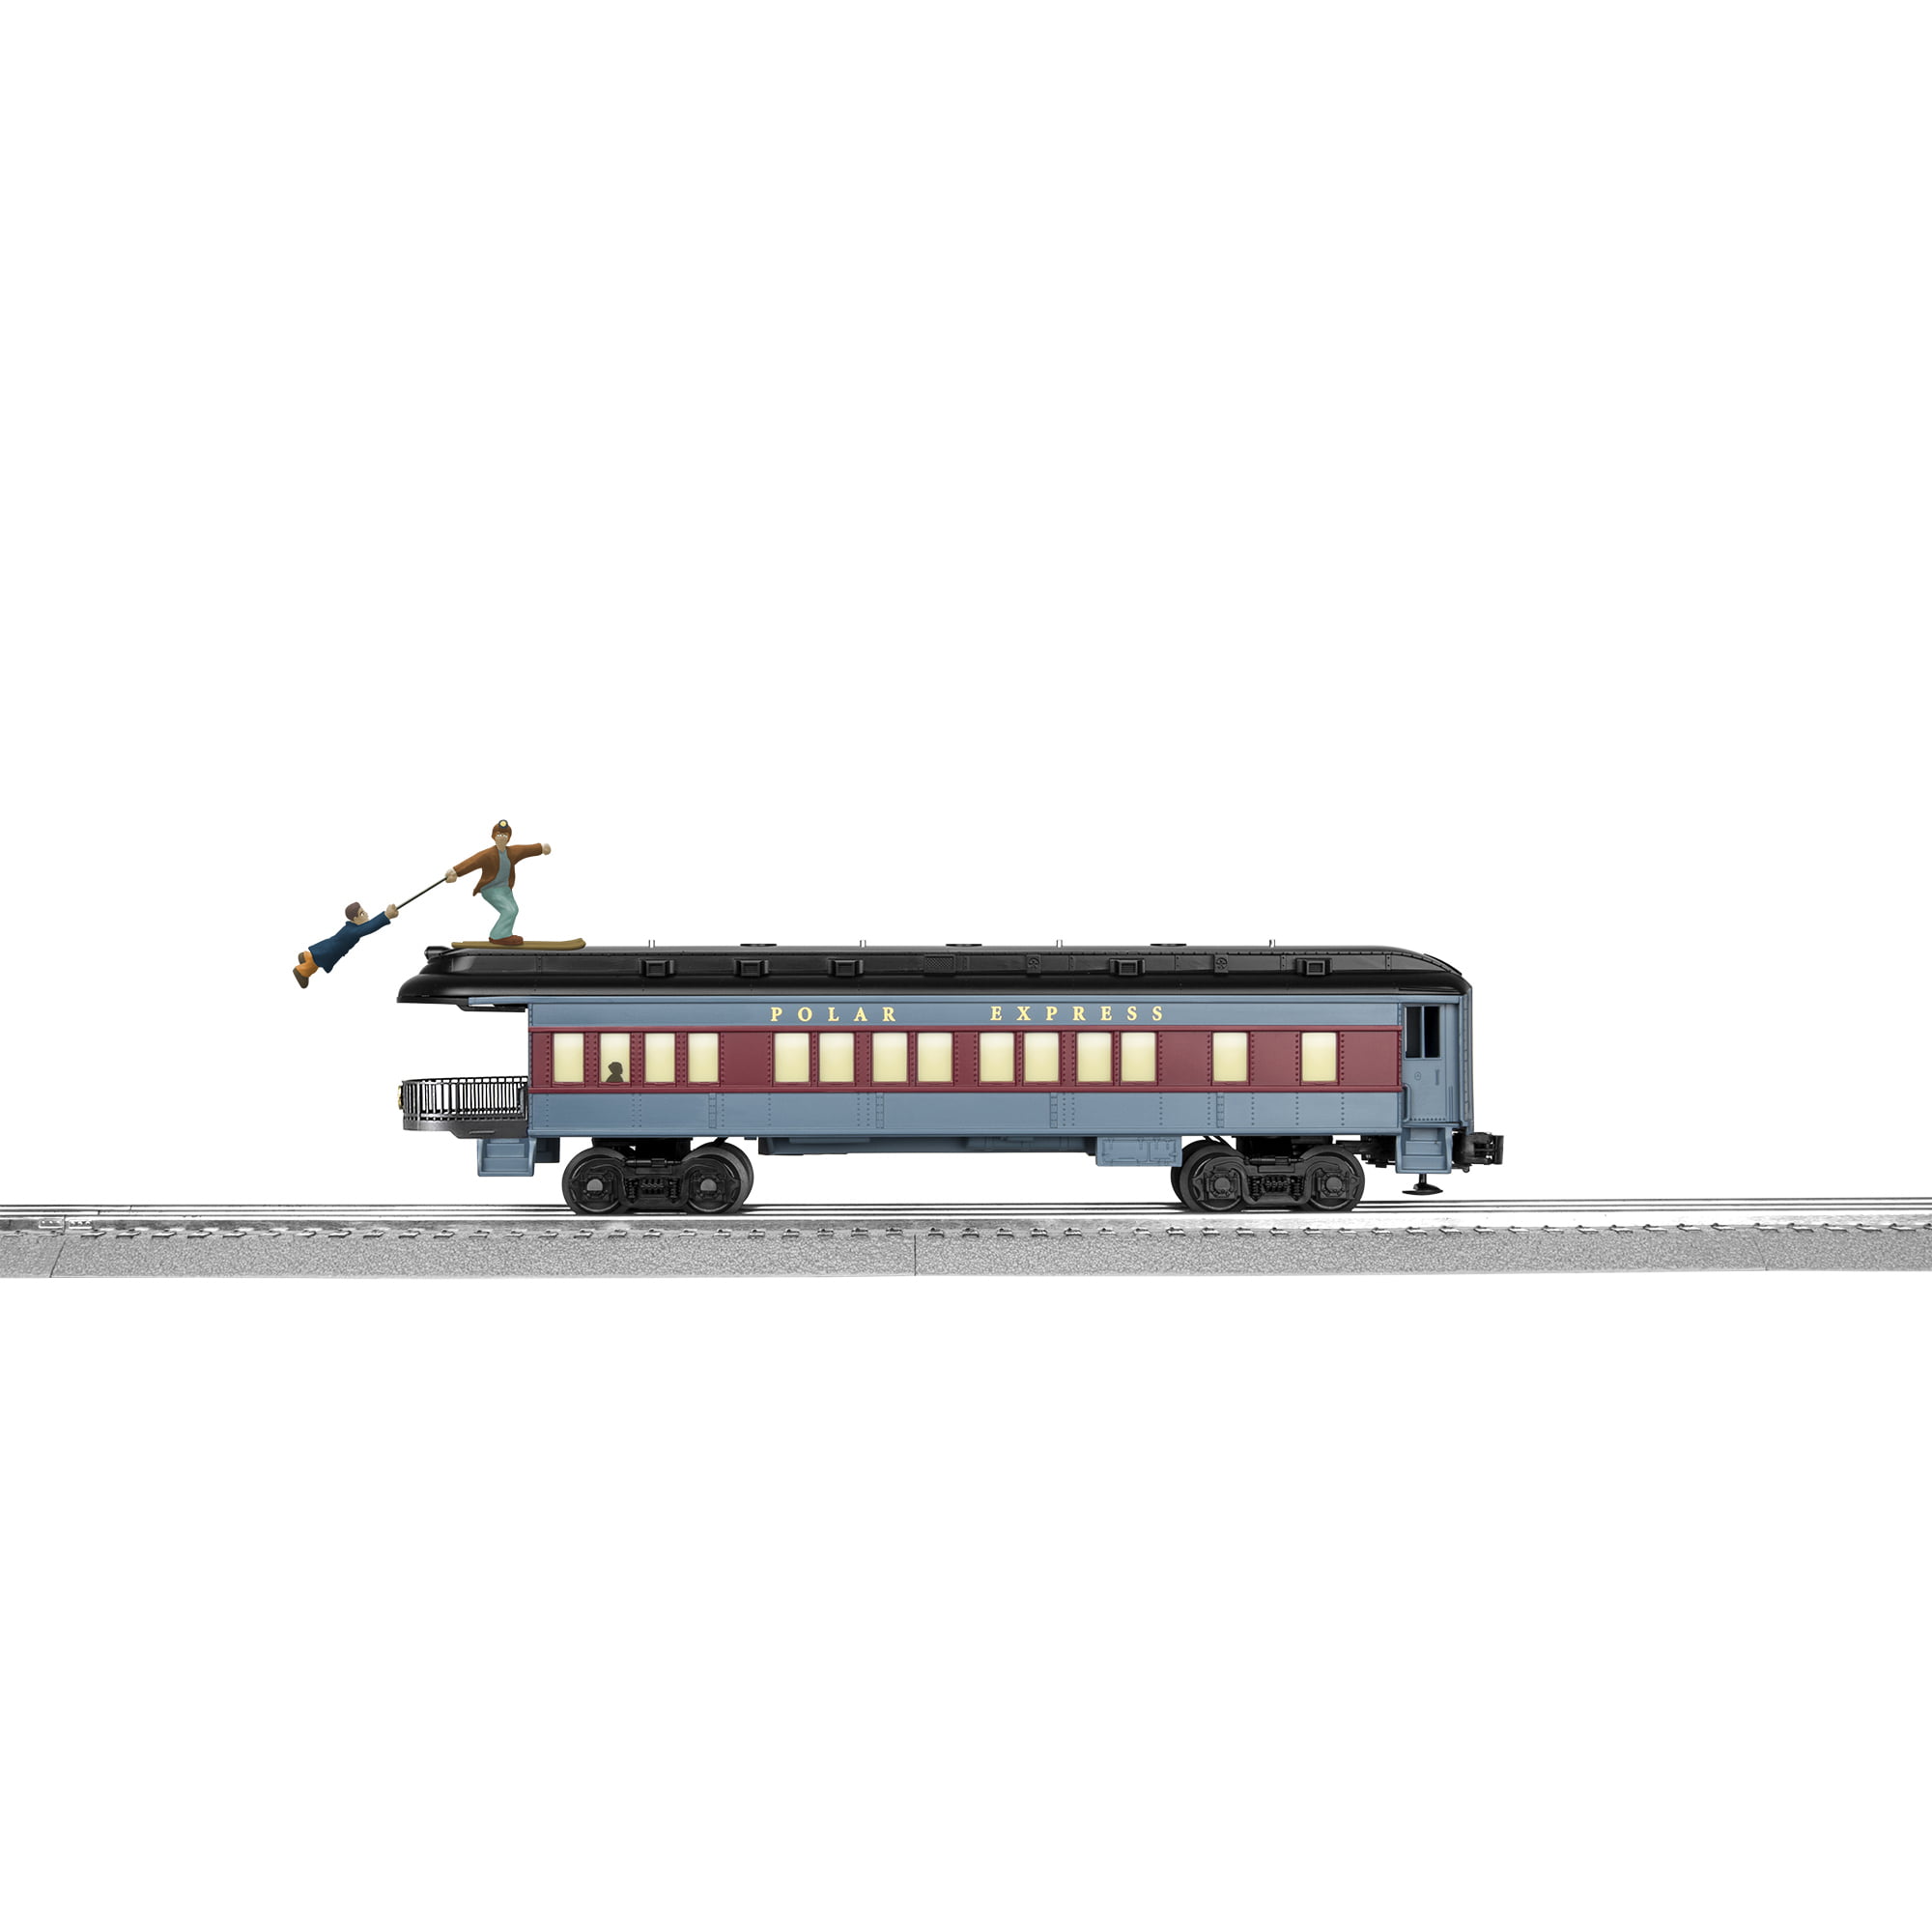 The Polar Express Skiing Hobo Observation Train Car with Black Roof